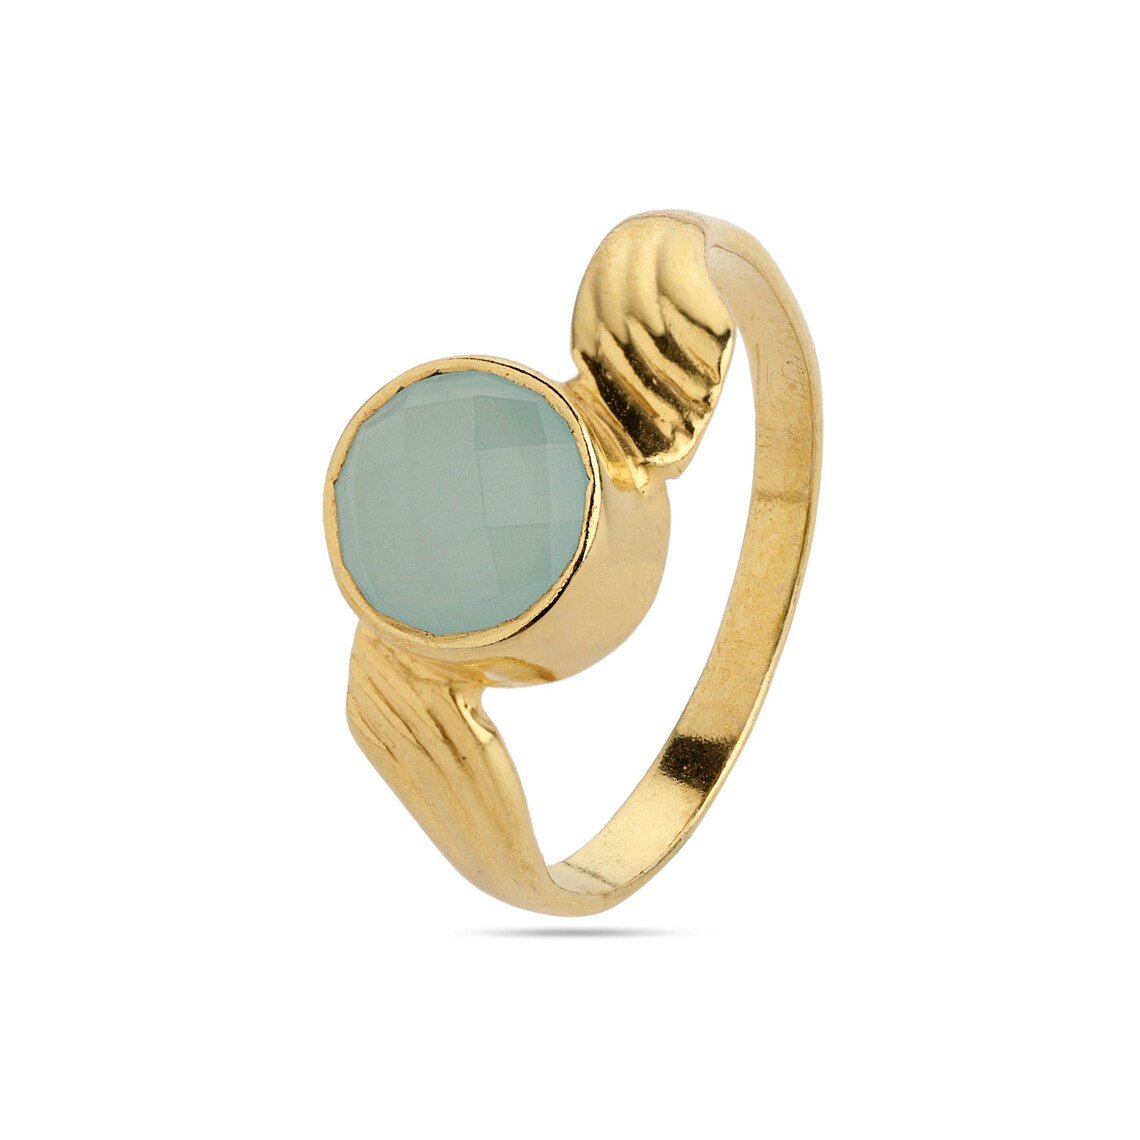 Blue Chalcedony Round Ring, 925 Sterling Silver Ring, Gold Plated Ring, Everyday Ring, Handmade Ring, Stackable Ring, Proposal Ring